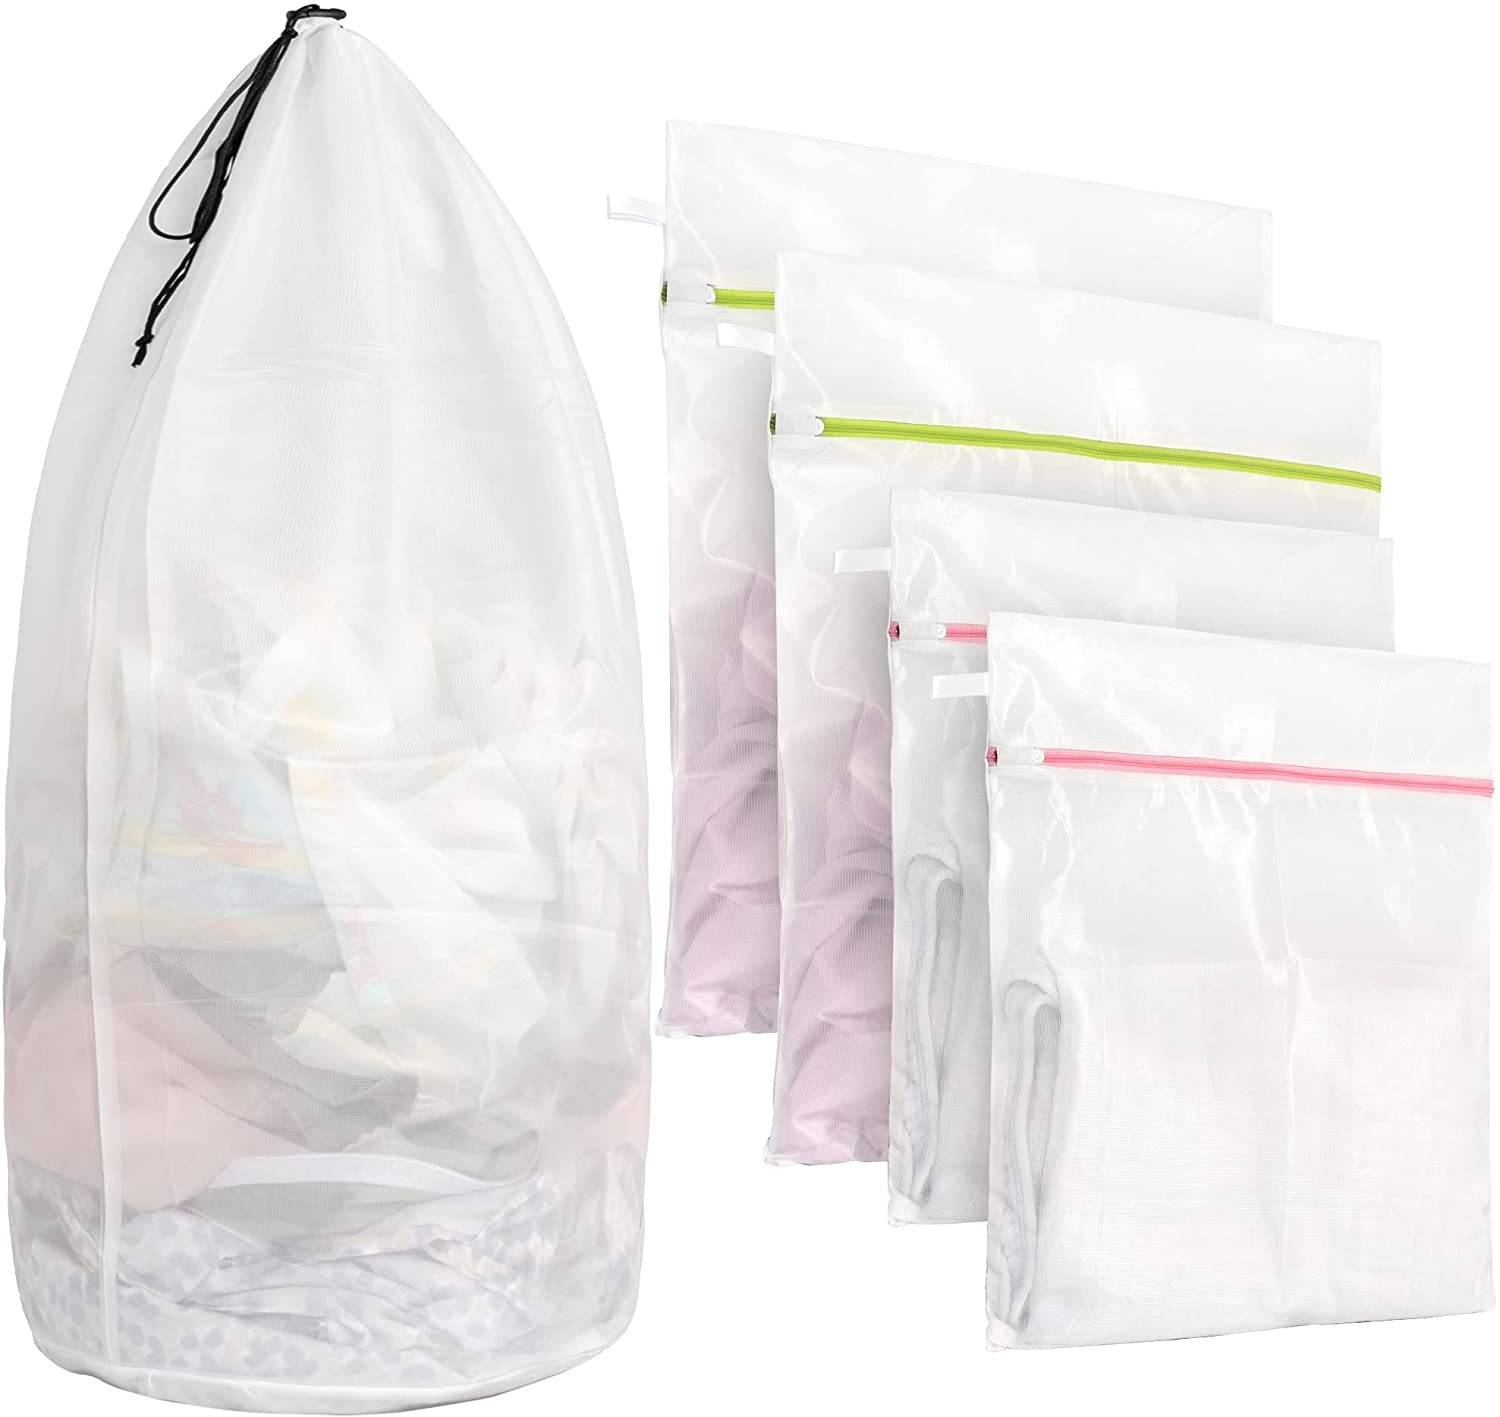 Mesh Laundry Bag for Delicates Breathable Wash Fabric with Colored Zippers  , Wash Bags for Delicates , Socks